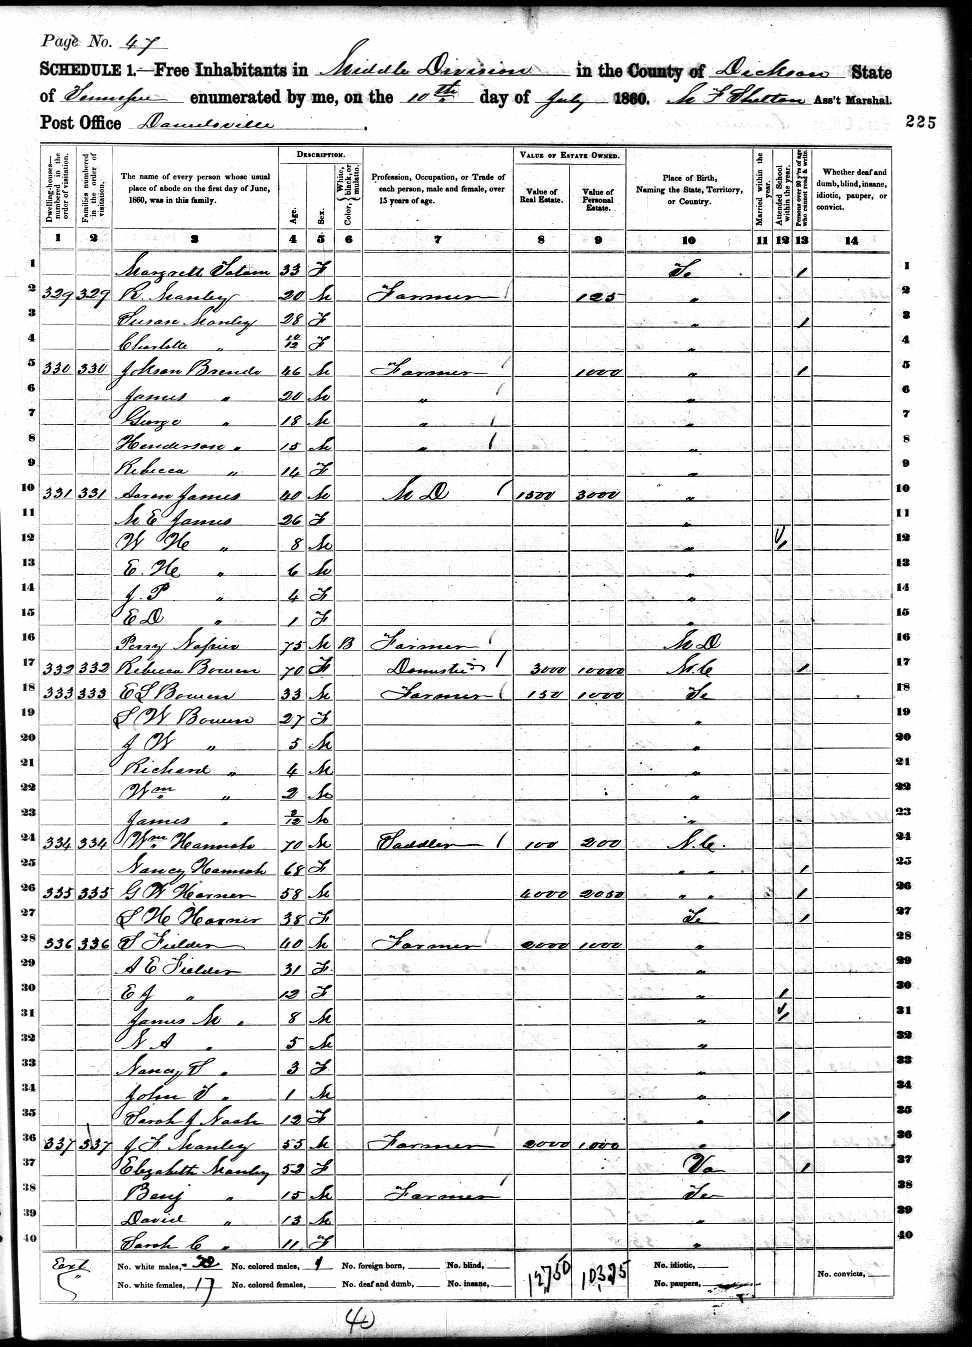 Jackson Brazzell, 1860 Dickson County, Tennessee, census